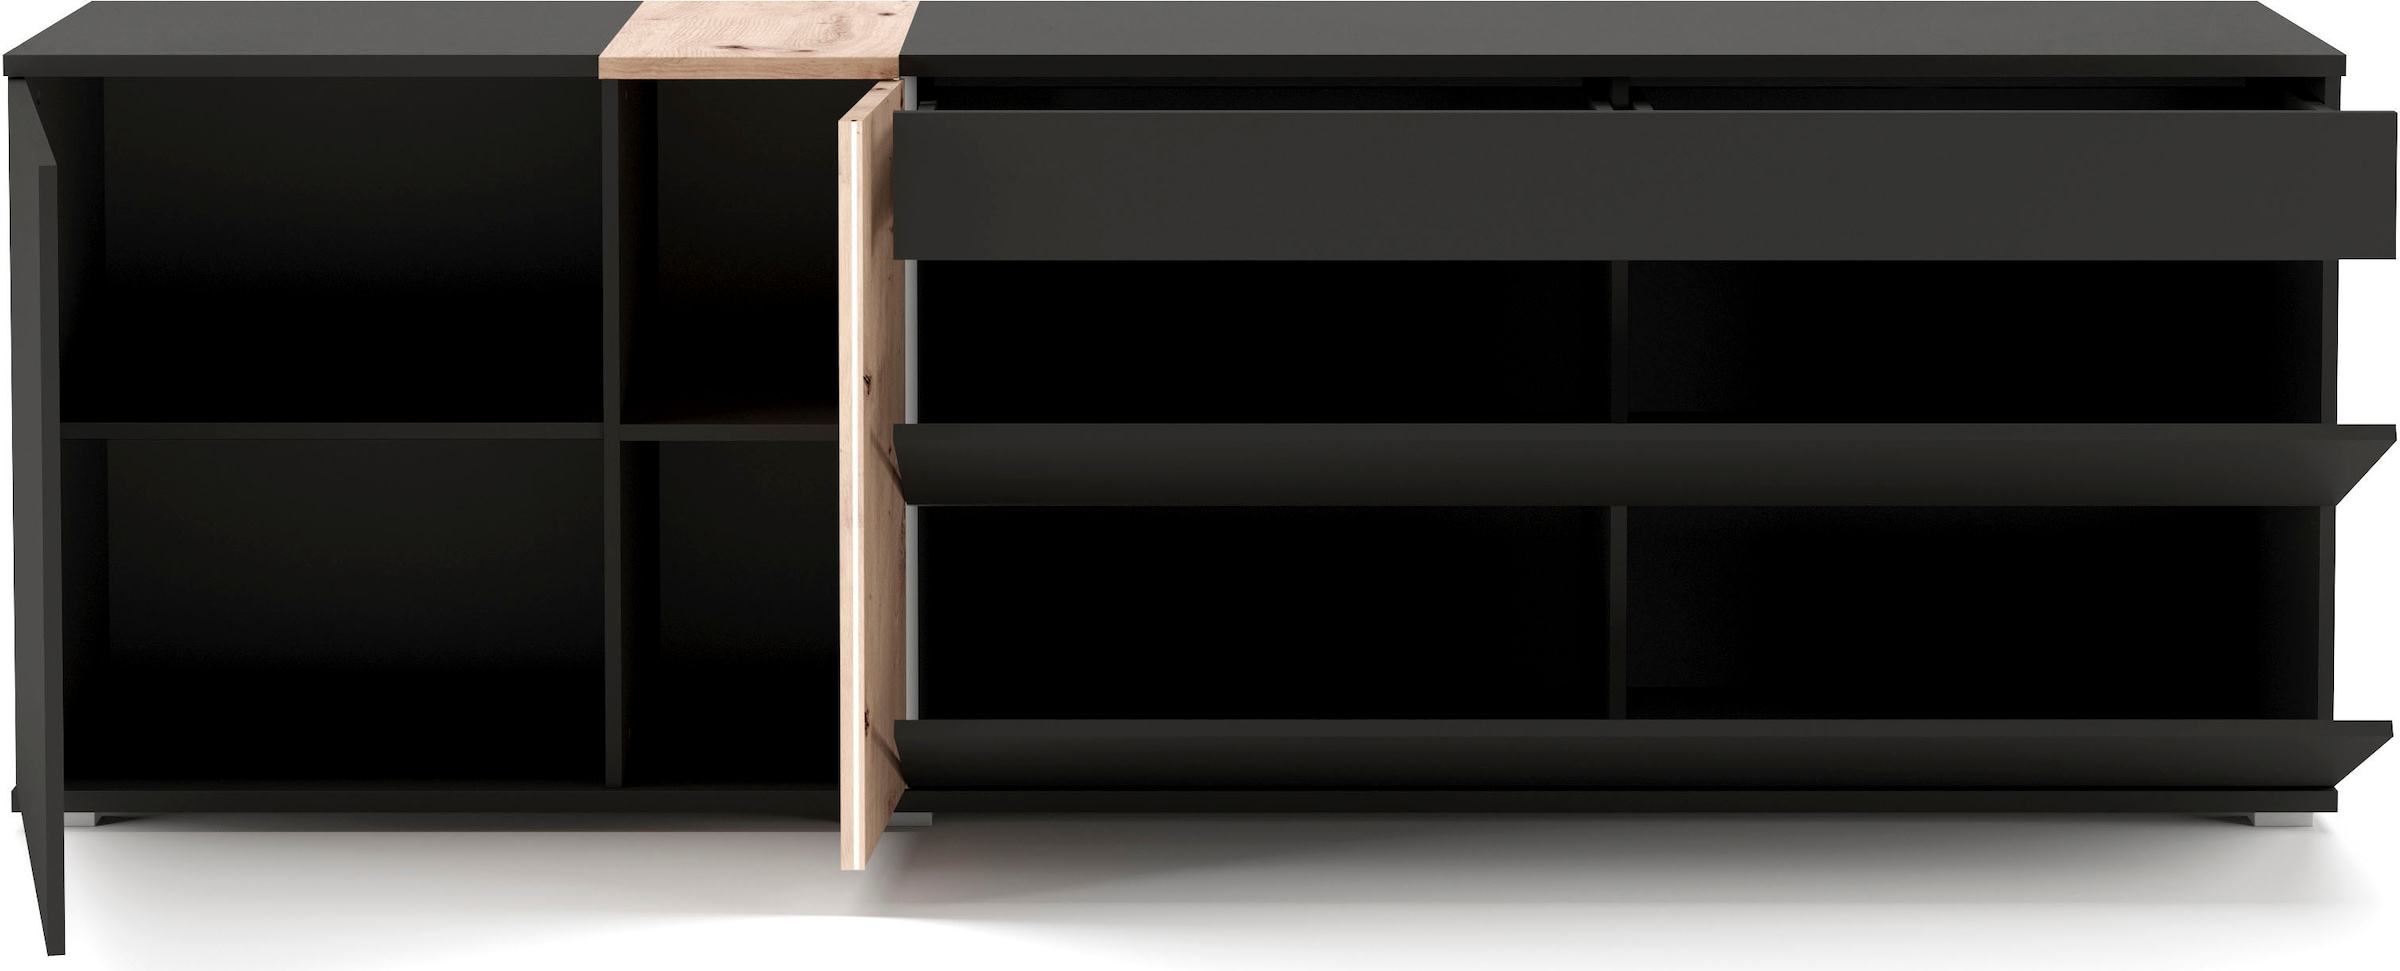 COTTA Sideboard »Montana«, Breite 235 cm, inkl. LED-Beleuchtung und Push-To-Open